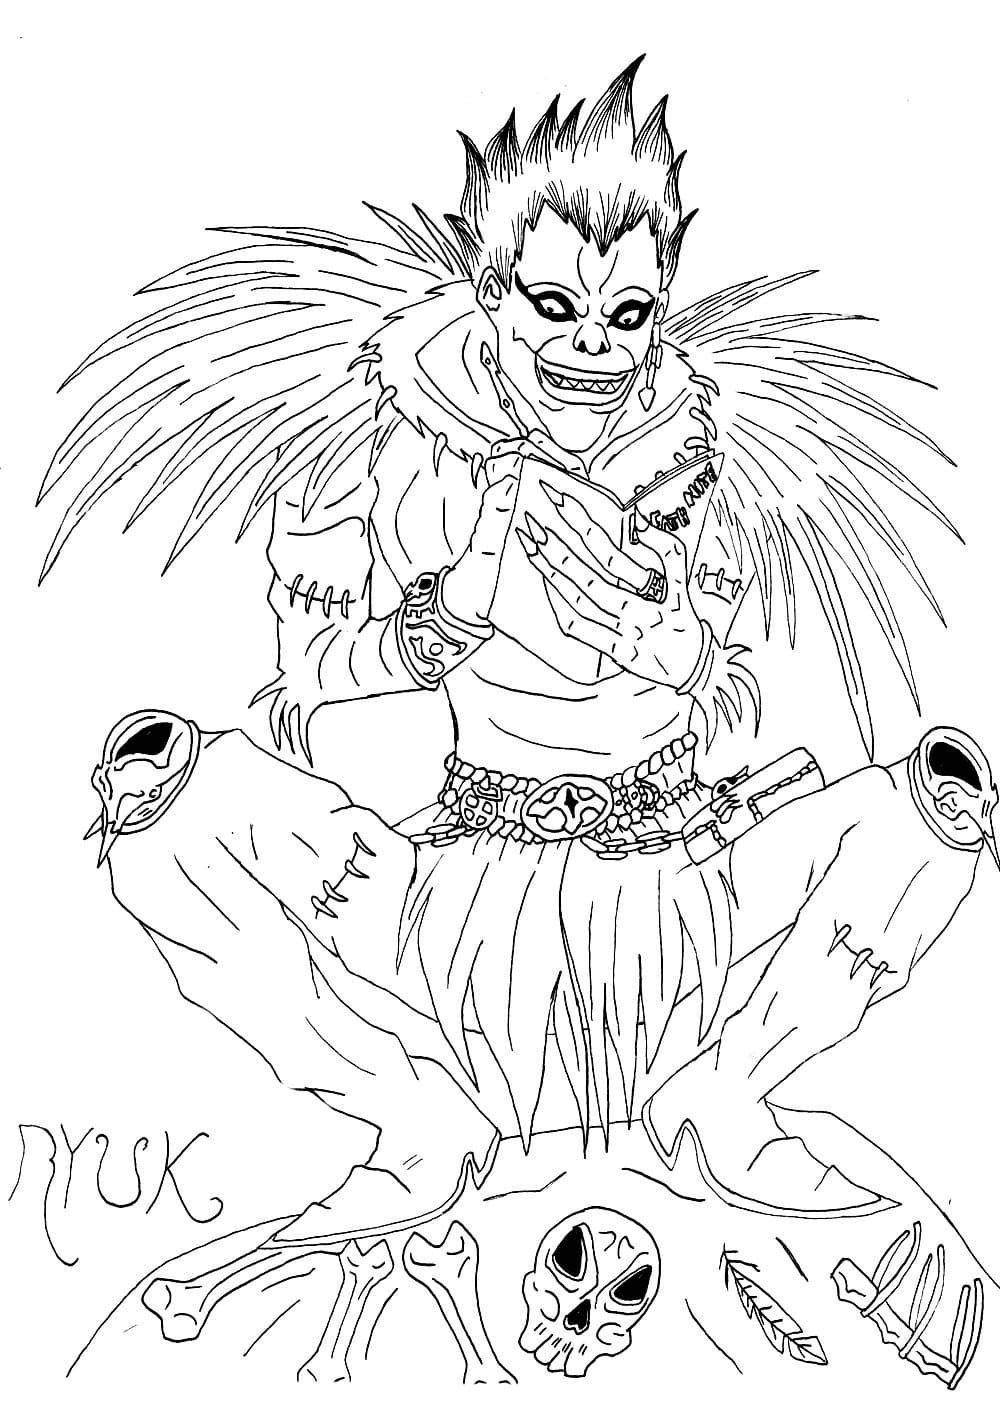 Ryuk is reading a notebook Coloring Page